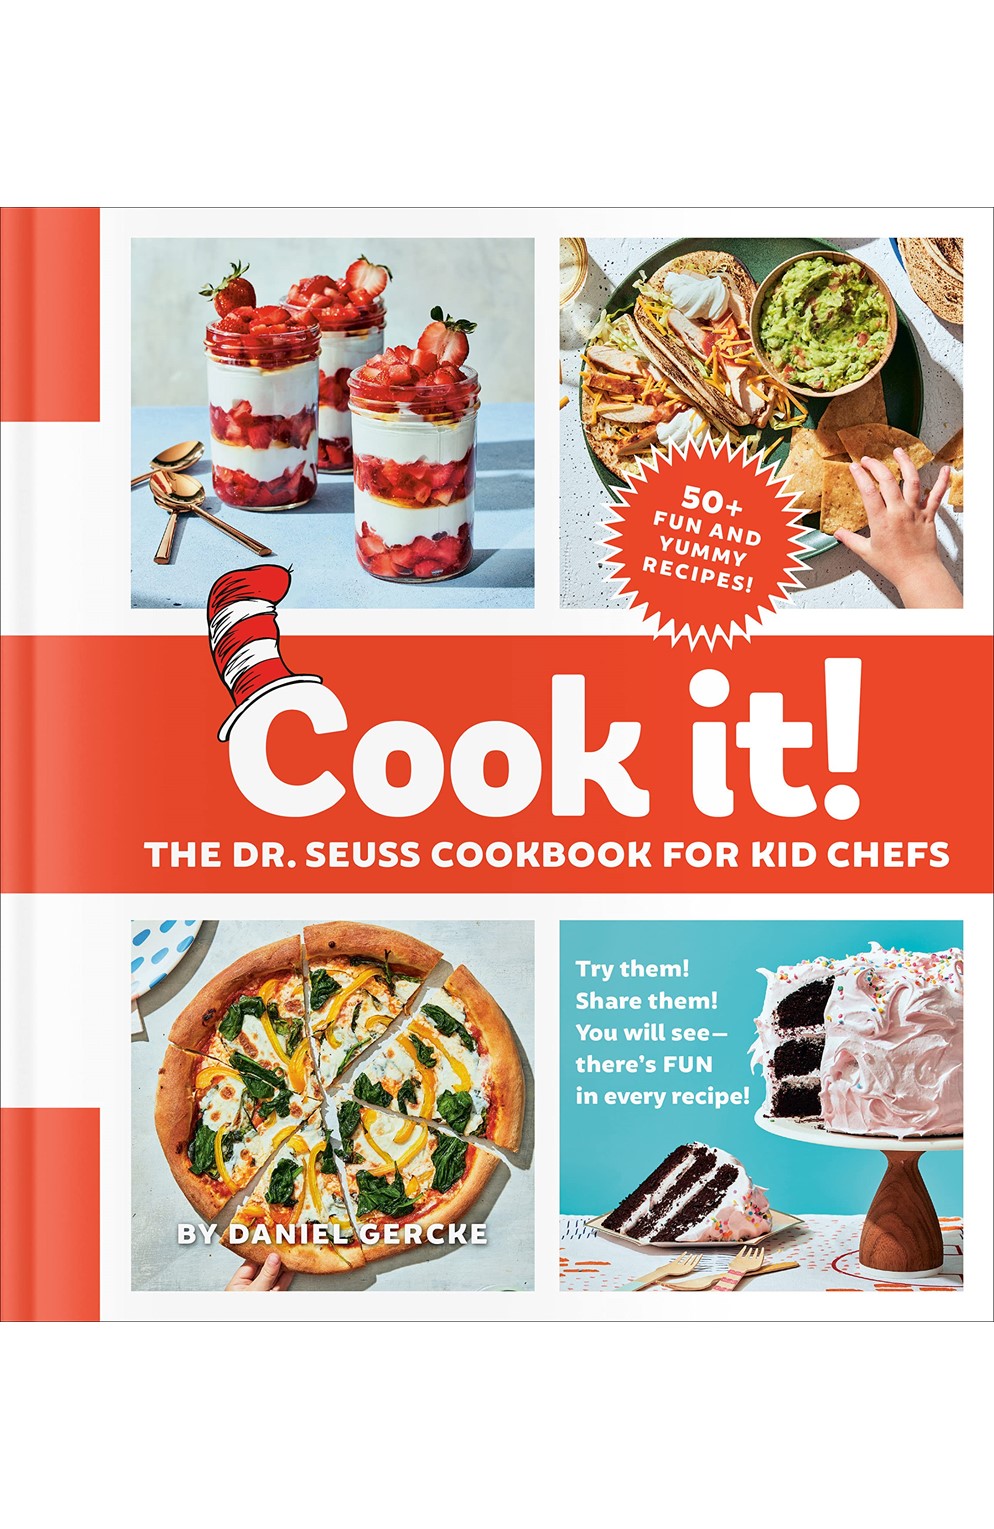 Cook It! The Dr. Seuss Cookbook For Kid Chefs: 50+ Yummy Recipes